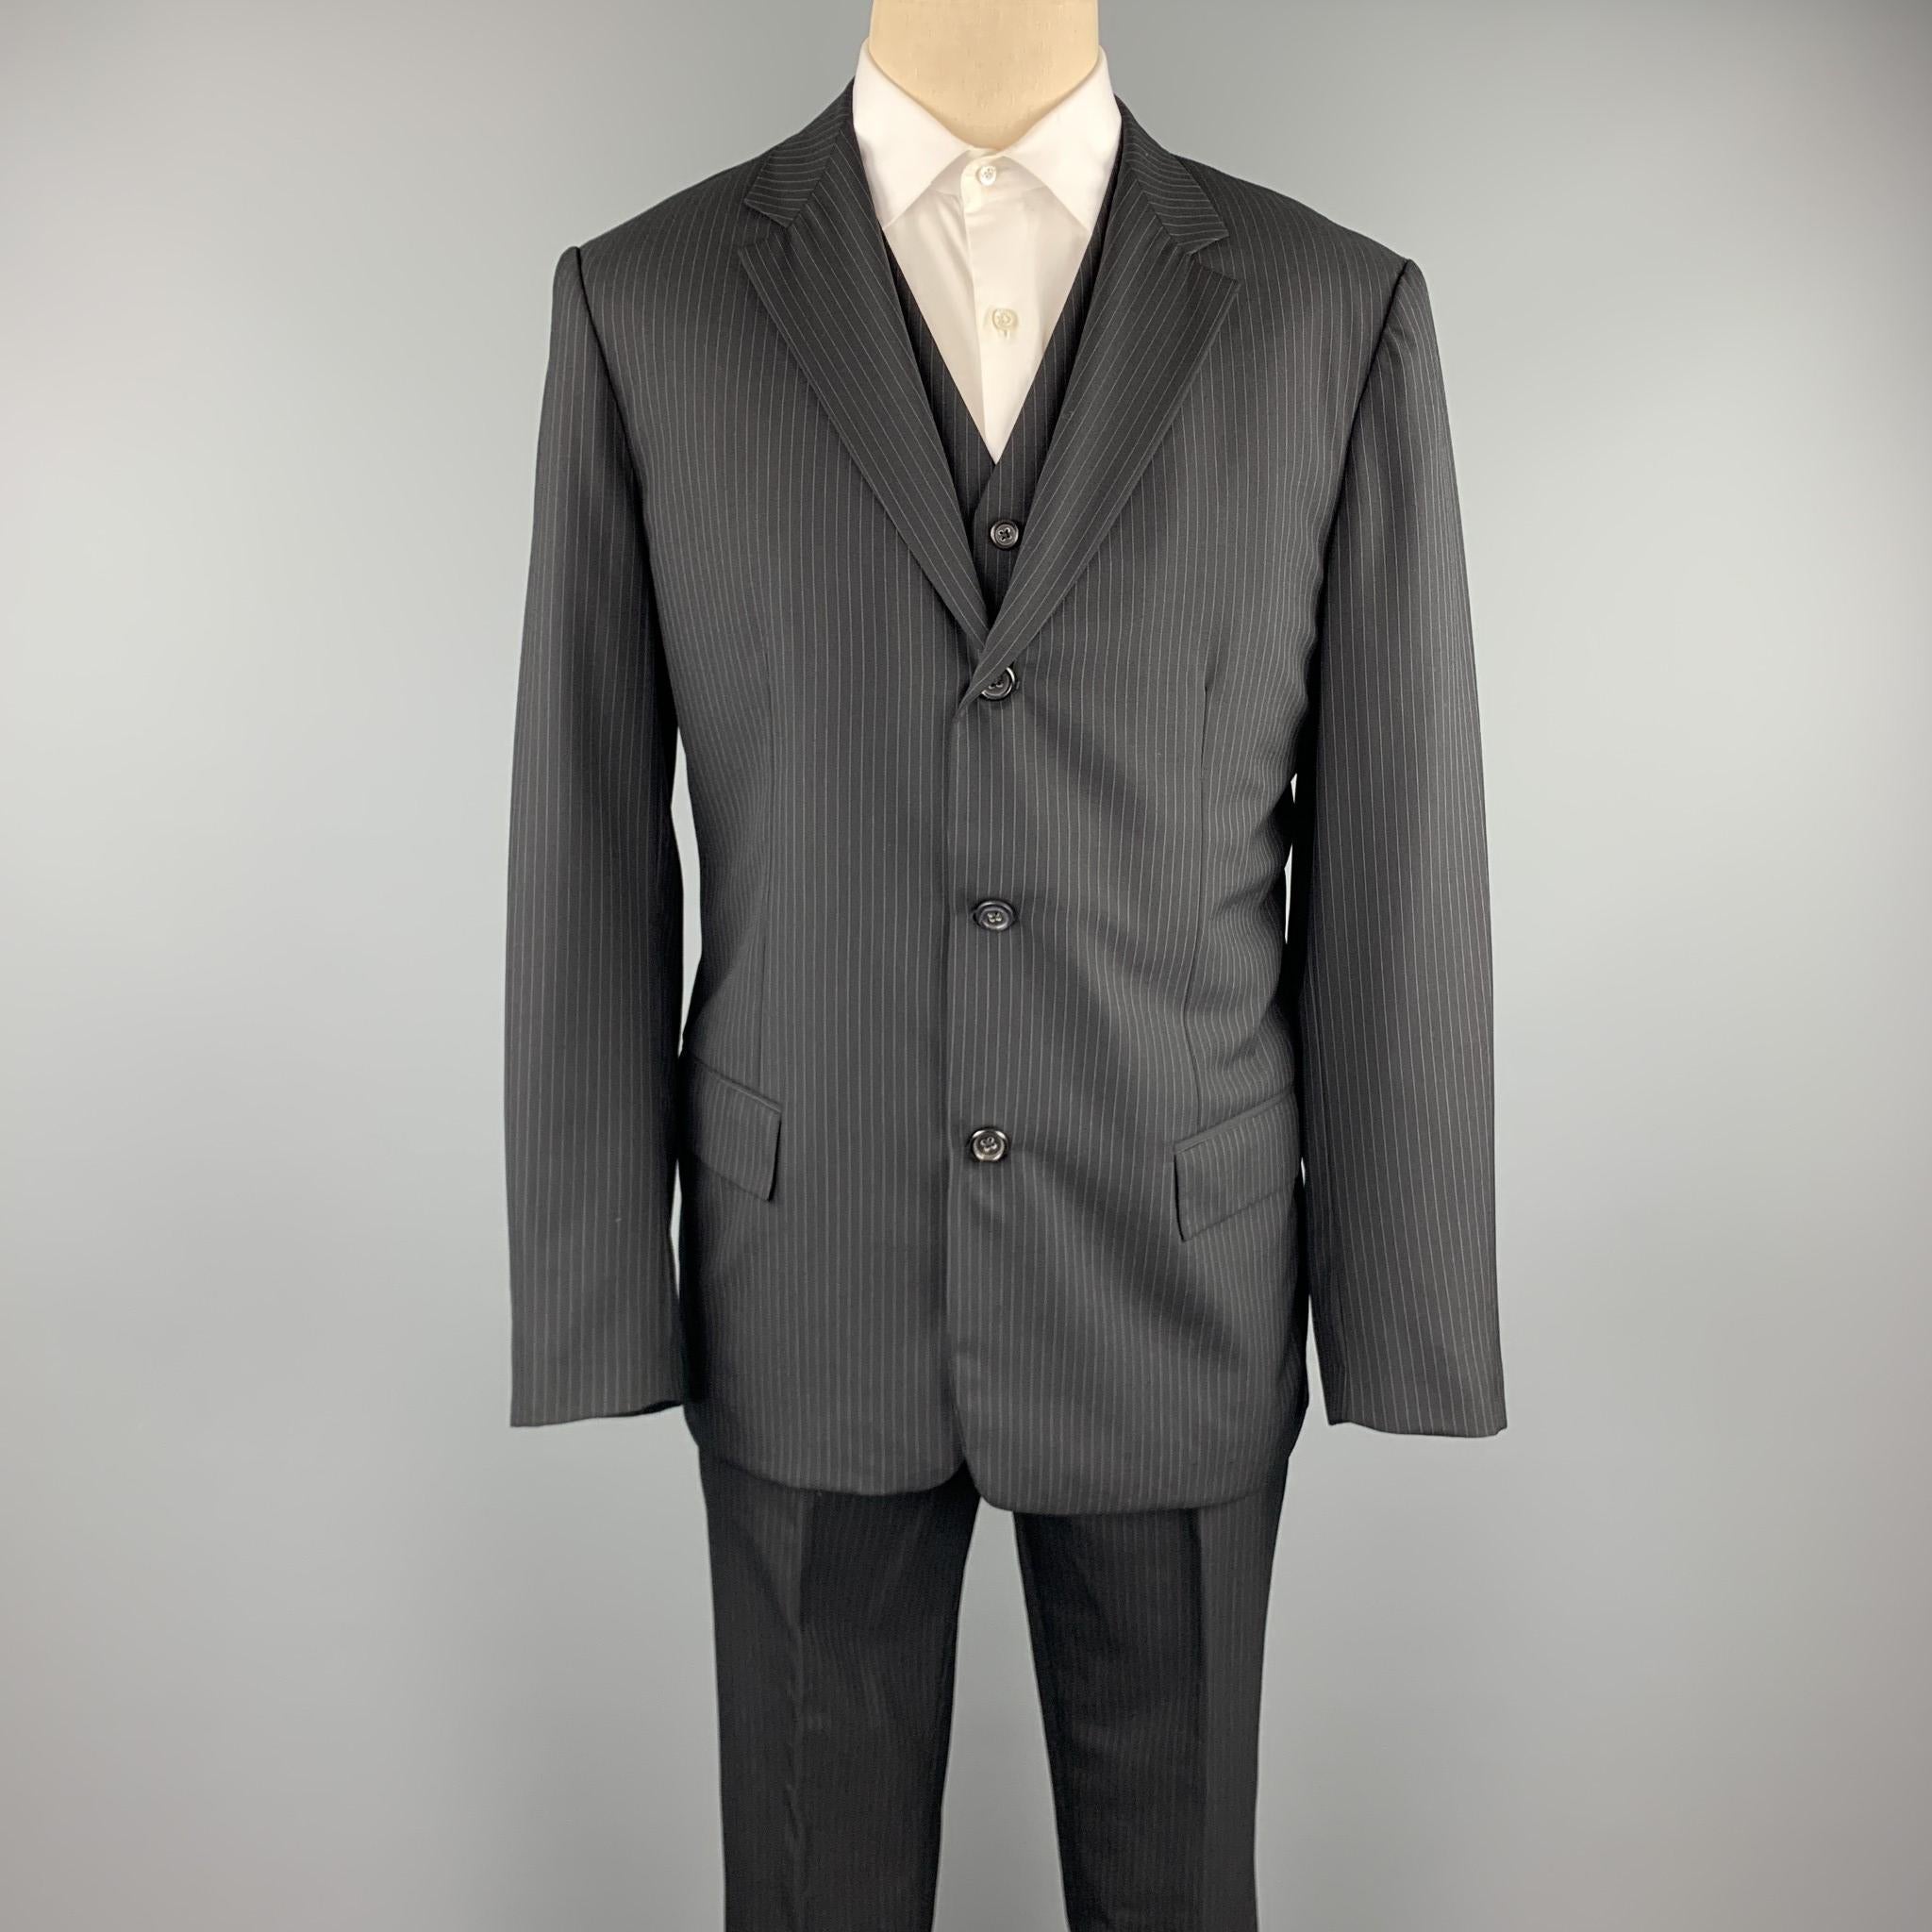 JIL SANDER suit comes in a black stripe wool and includes a single breasted, three button sport coat with a notch lapel and matching vest & flat front trousers. Made in Italy.

Excellent Pre-Owned Condition.
Marked: IT L